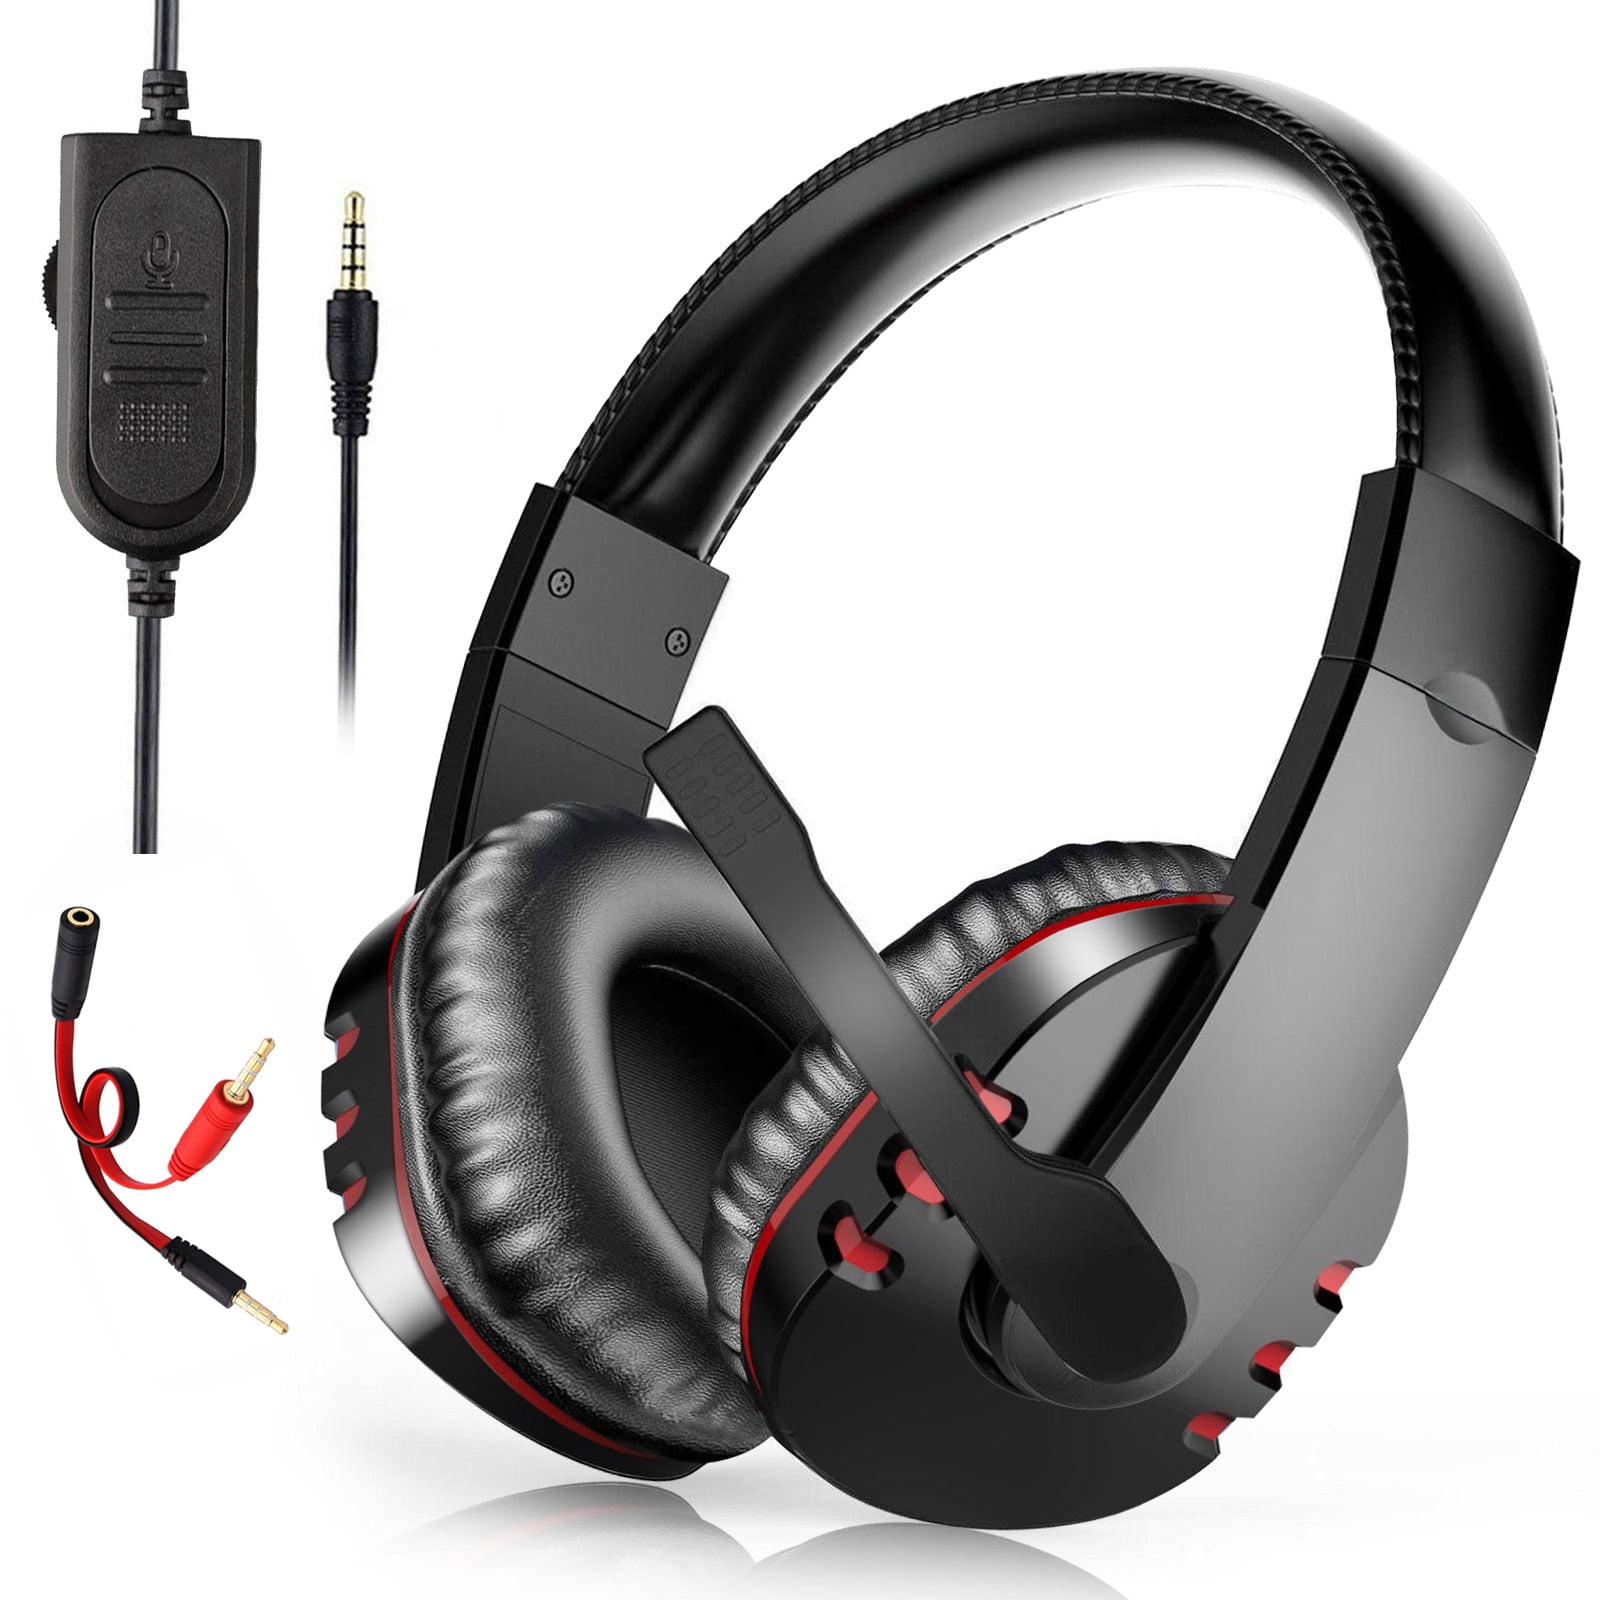 NUBWO N12 Gaming Headset & Xbox one Headset & PS4 Headset,3.5mm Surround Stereo Gaming Headphones with Mic Soft Memory Earmuffs for PC,Laptop,Video Game with Flexible Microphone Volume Control 